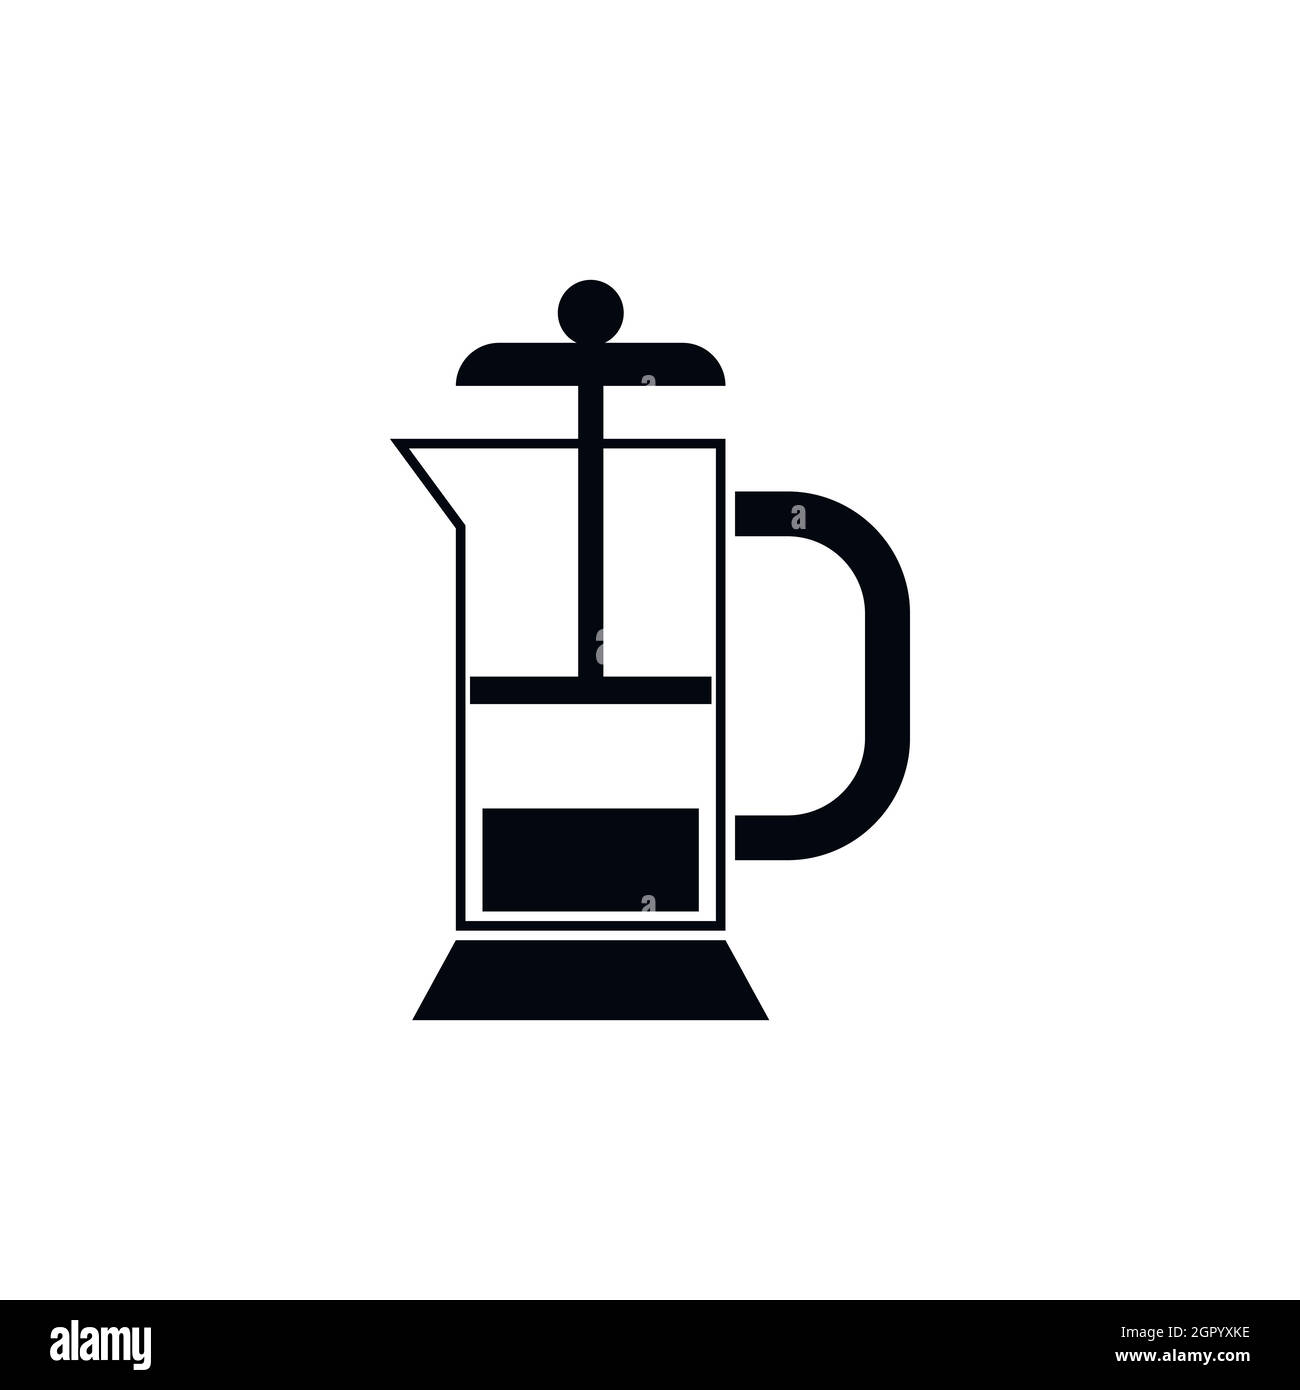 French press coffee maker icon Stock Vector